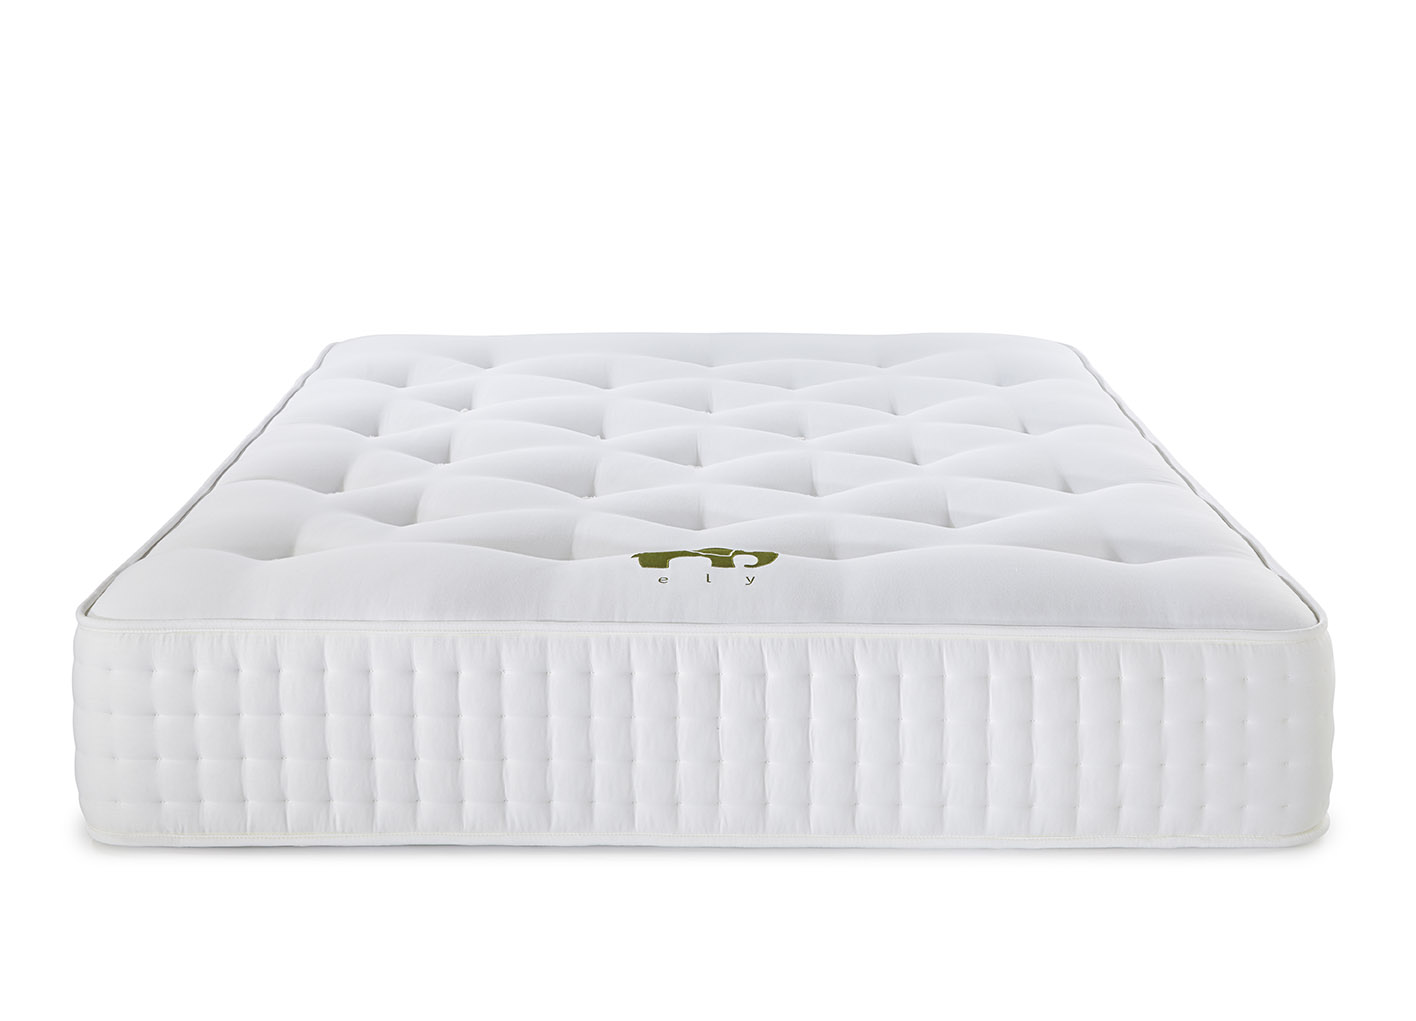 Can I purchase the Ely Mattress safely if I'm allergic to Horse Hair? - Ely  Mattress